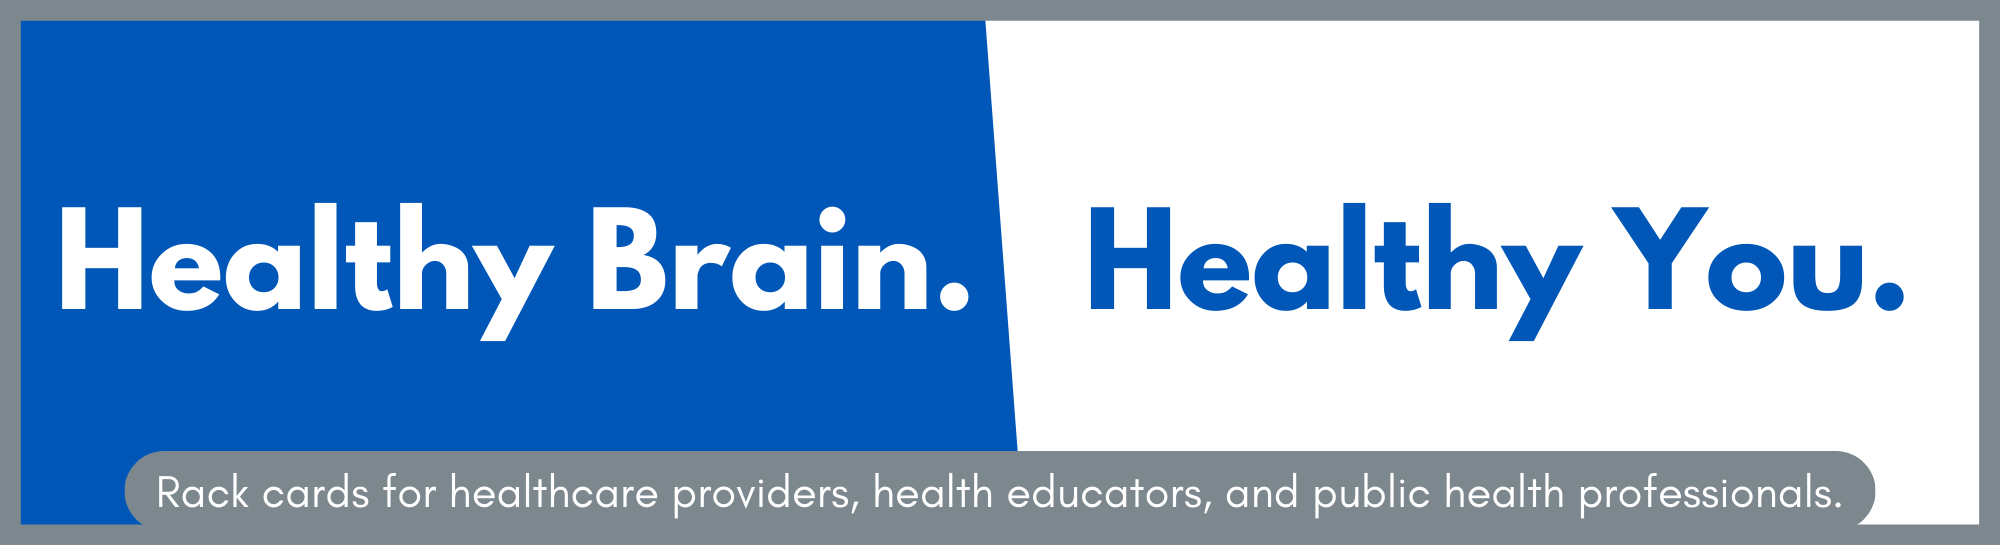 Healthy Brain. Healthy You. Rack cards for healthcare providers, health educators, and public health professionals.